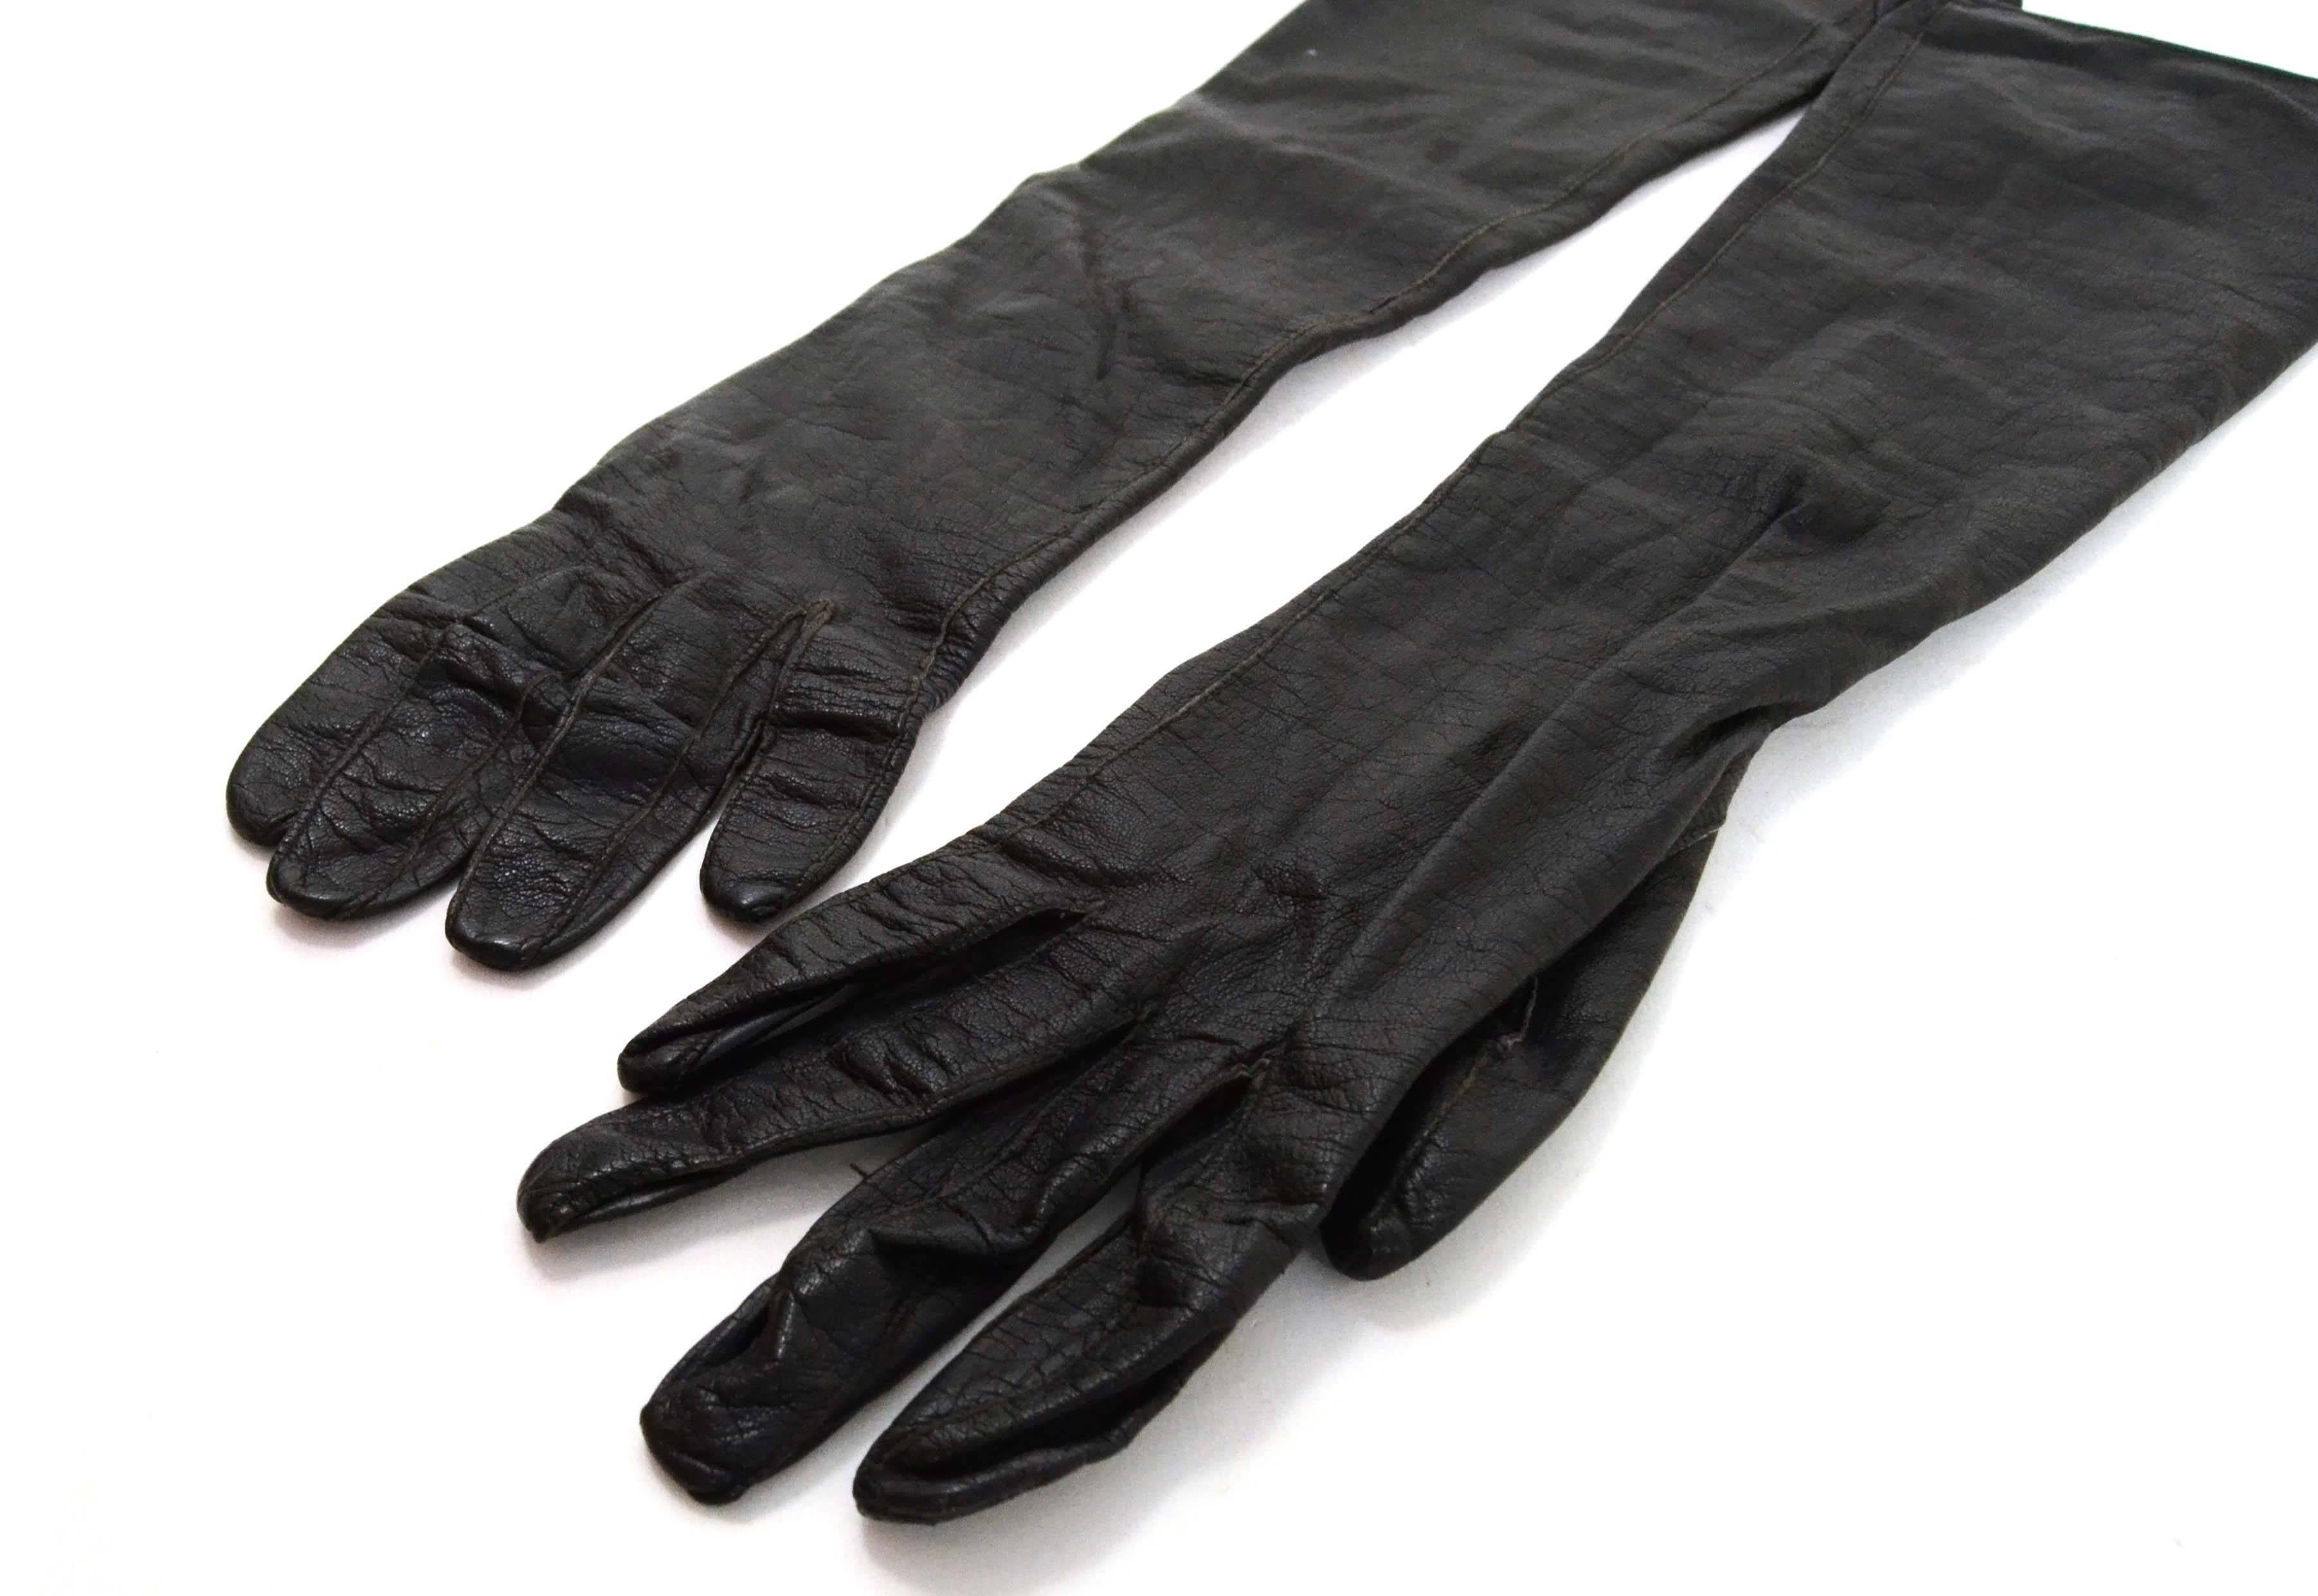 Alexander's Black Leather 3/4 Length Gloves
Made In: France
Color: Black
Materials: Leather
Closure/Opening: Pull on
Overall Condition: Excellent vintage, pre-owned condition with the exception of some natural wear throughout exterior
Marked